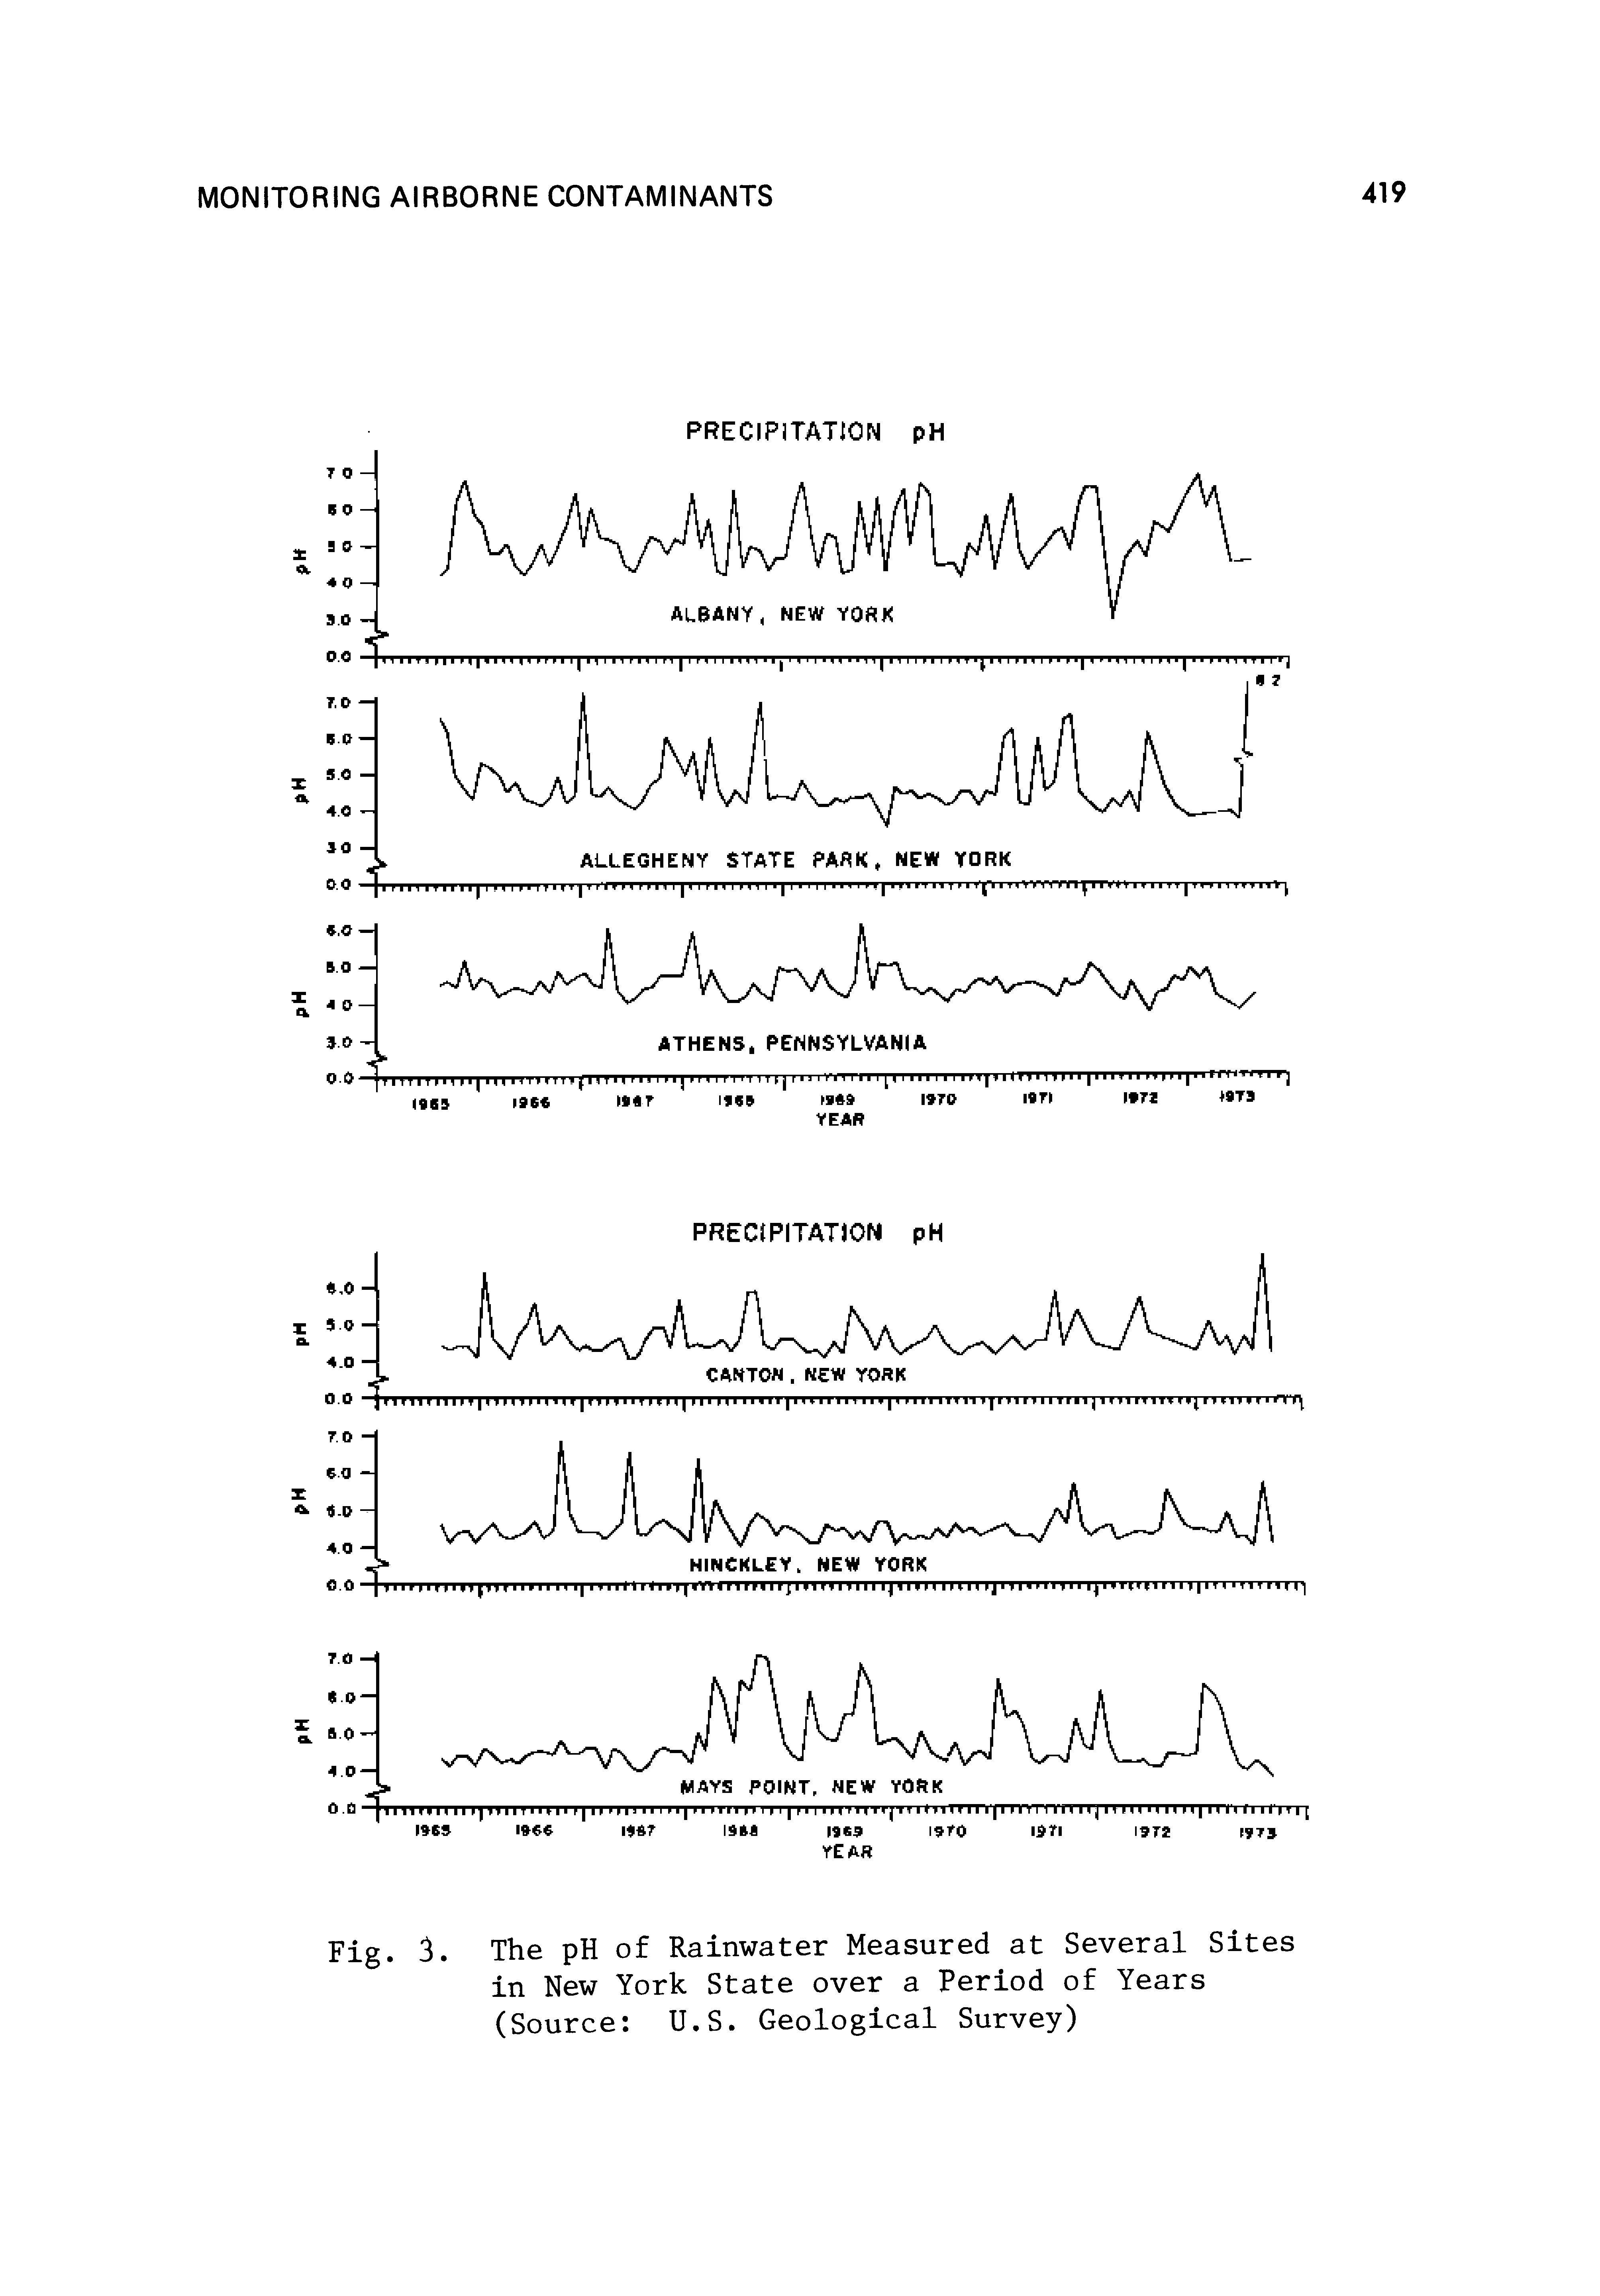 Fig. 3. The pH of Rainwater Measured at Several Sites in New York State over a Period of Years (Source U.S. Geological Survey)...